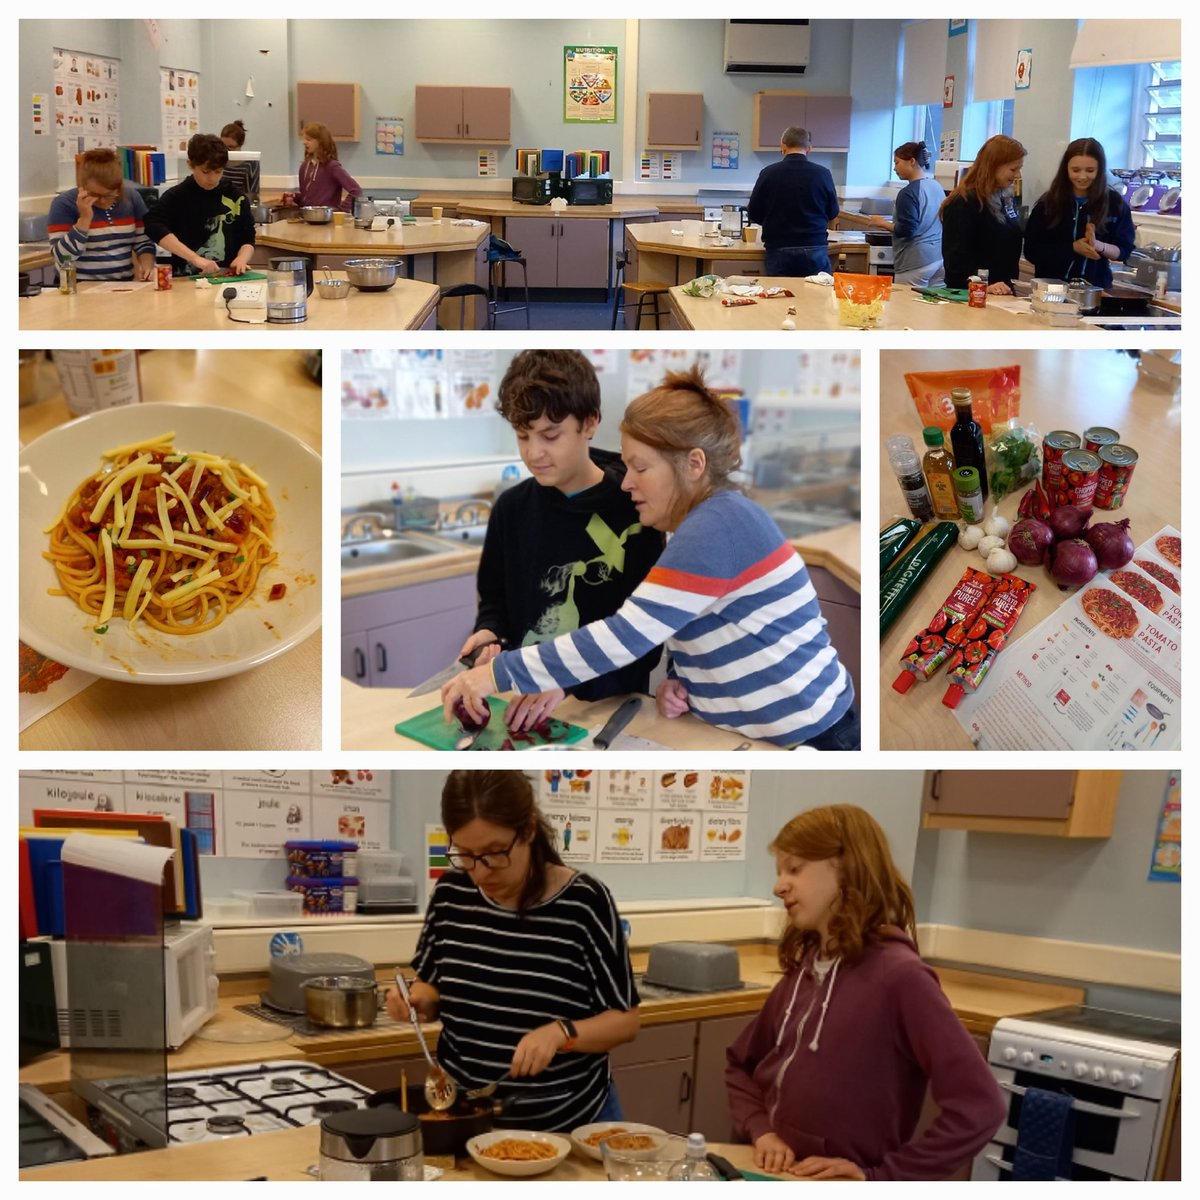 Another great night with our @HyndlandSec families who made a healthy and delicious tomato pasta 😋. A big thank you to @NutritionScot for their support 🙏 @FARE_Scotland @FareJenny @Jimmy_FARE @paul_fare